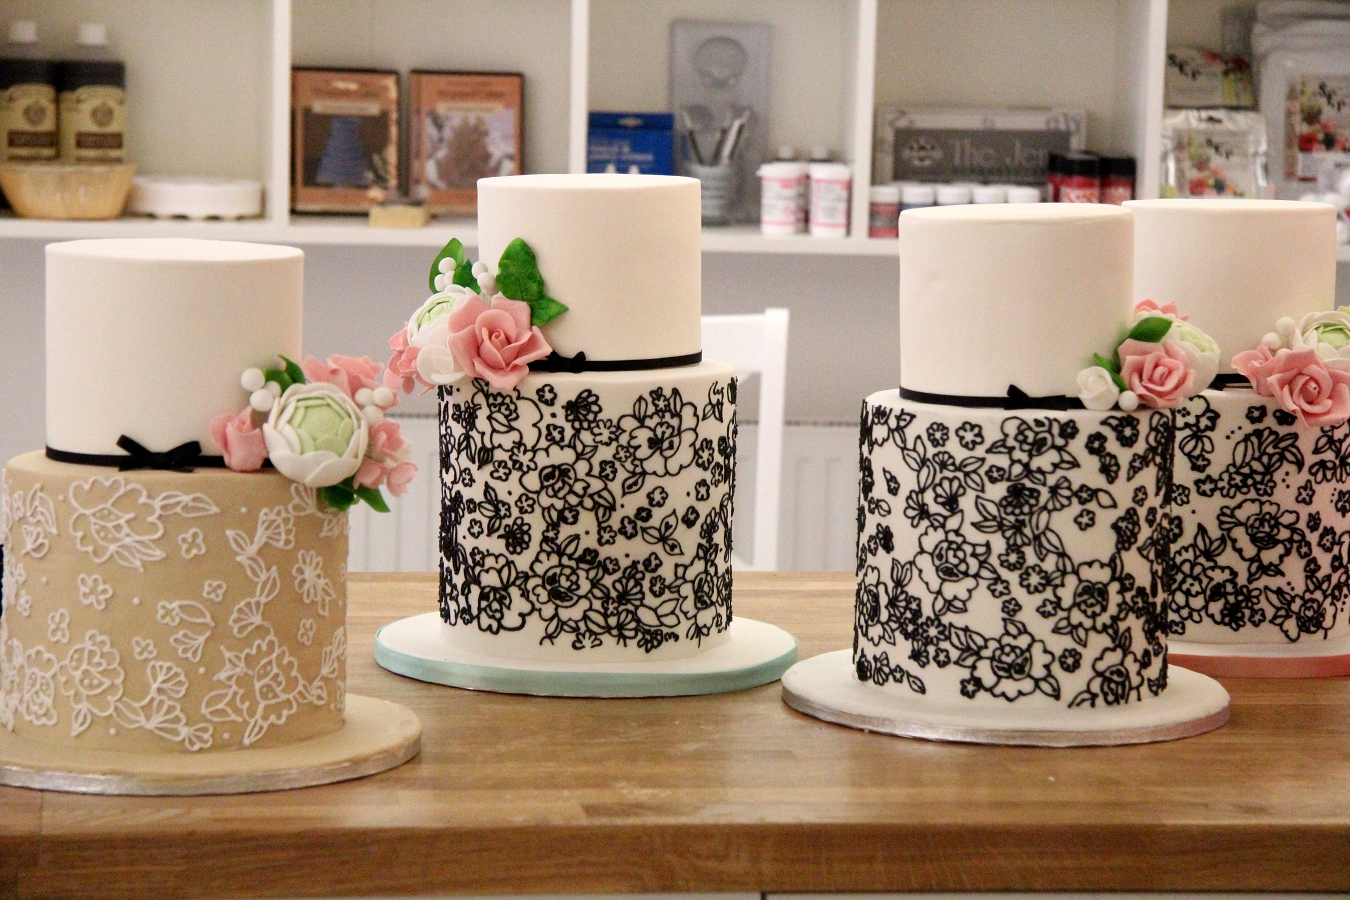 Decorated Cakes on Display